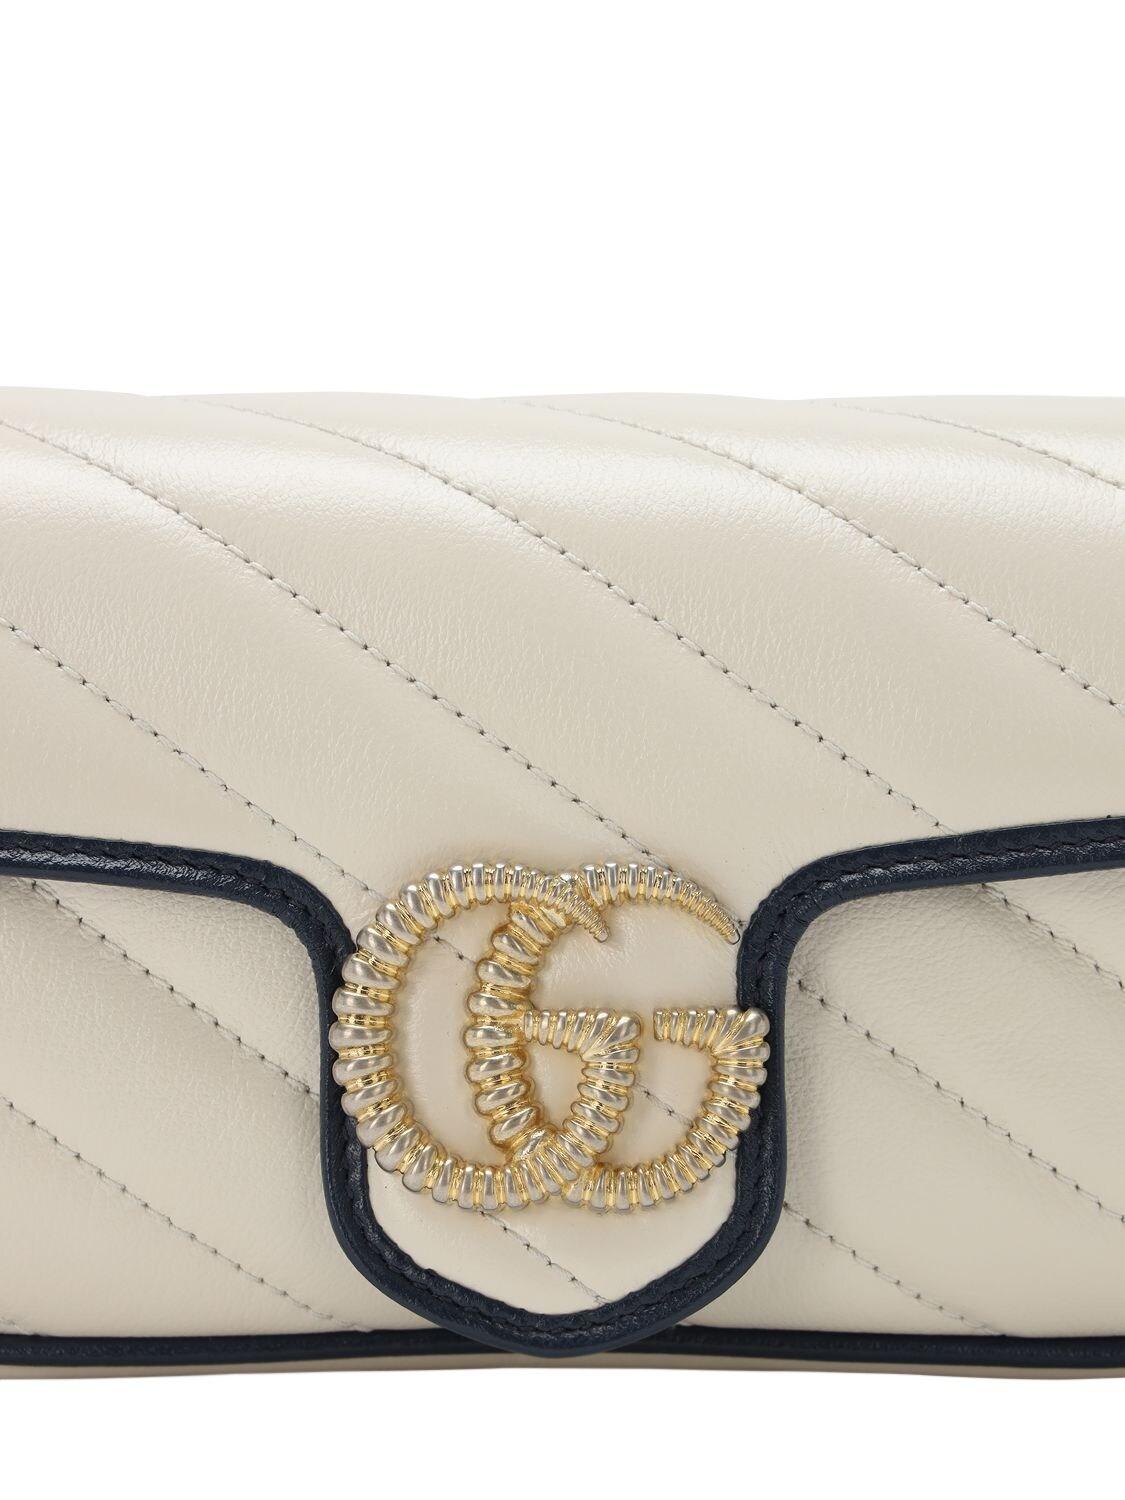 Gucci GG Marmont Small Shoulder Bag in White | Lyst